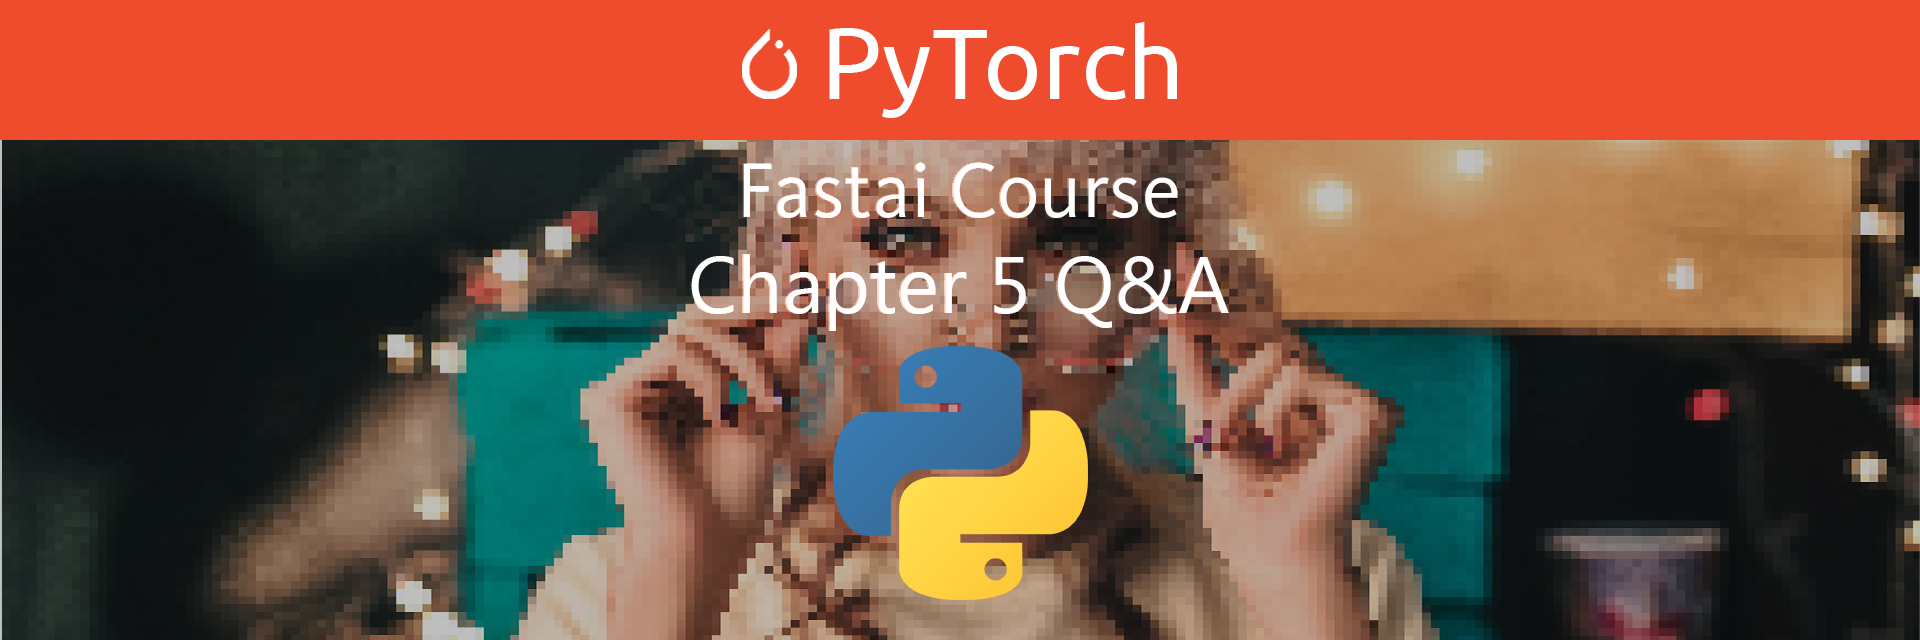 Fastai Course: Chapter 5 Q&A